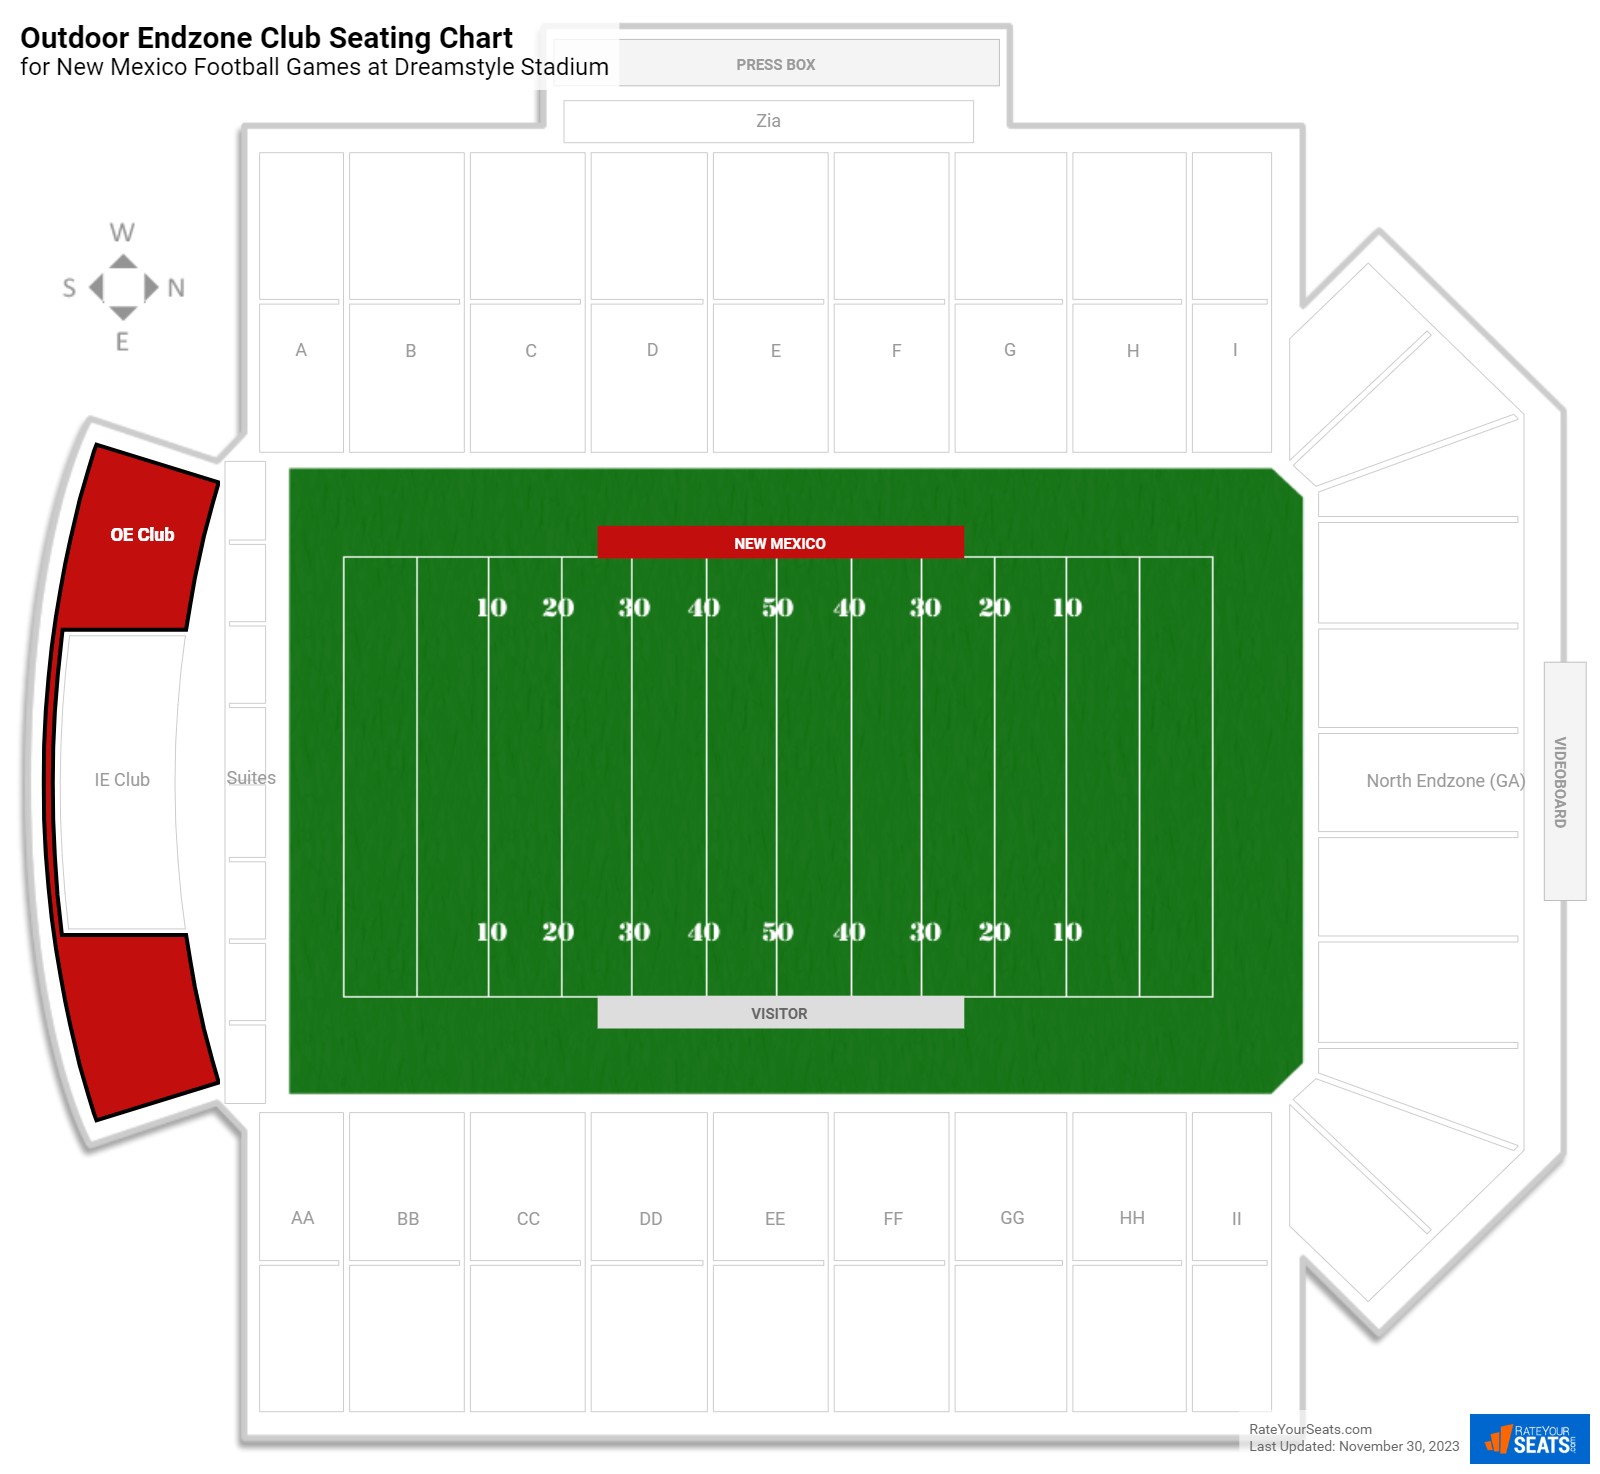 New Mexico Outdoor Endzone Club Seating Chart at Dreamstyle Stadium